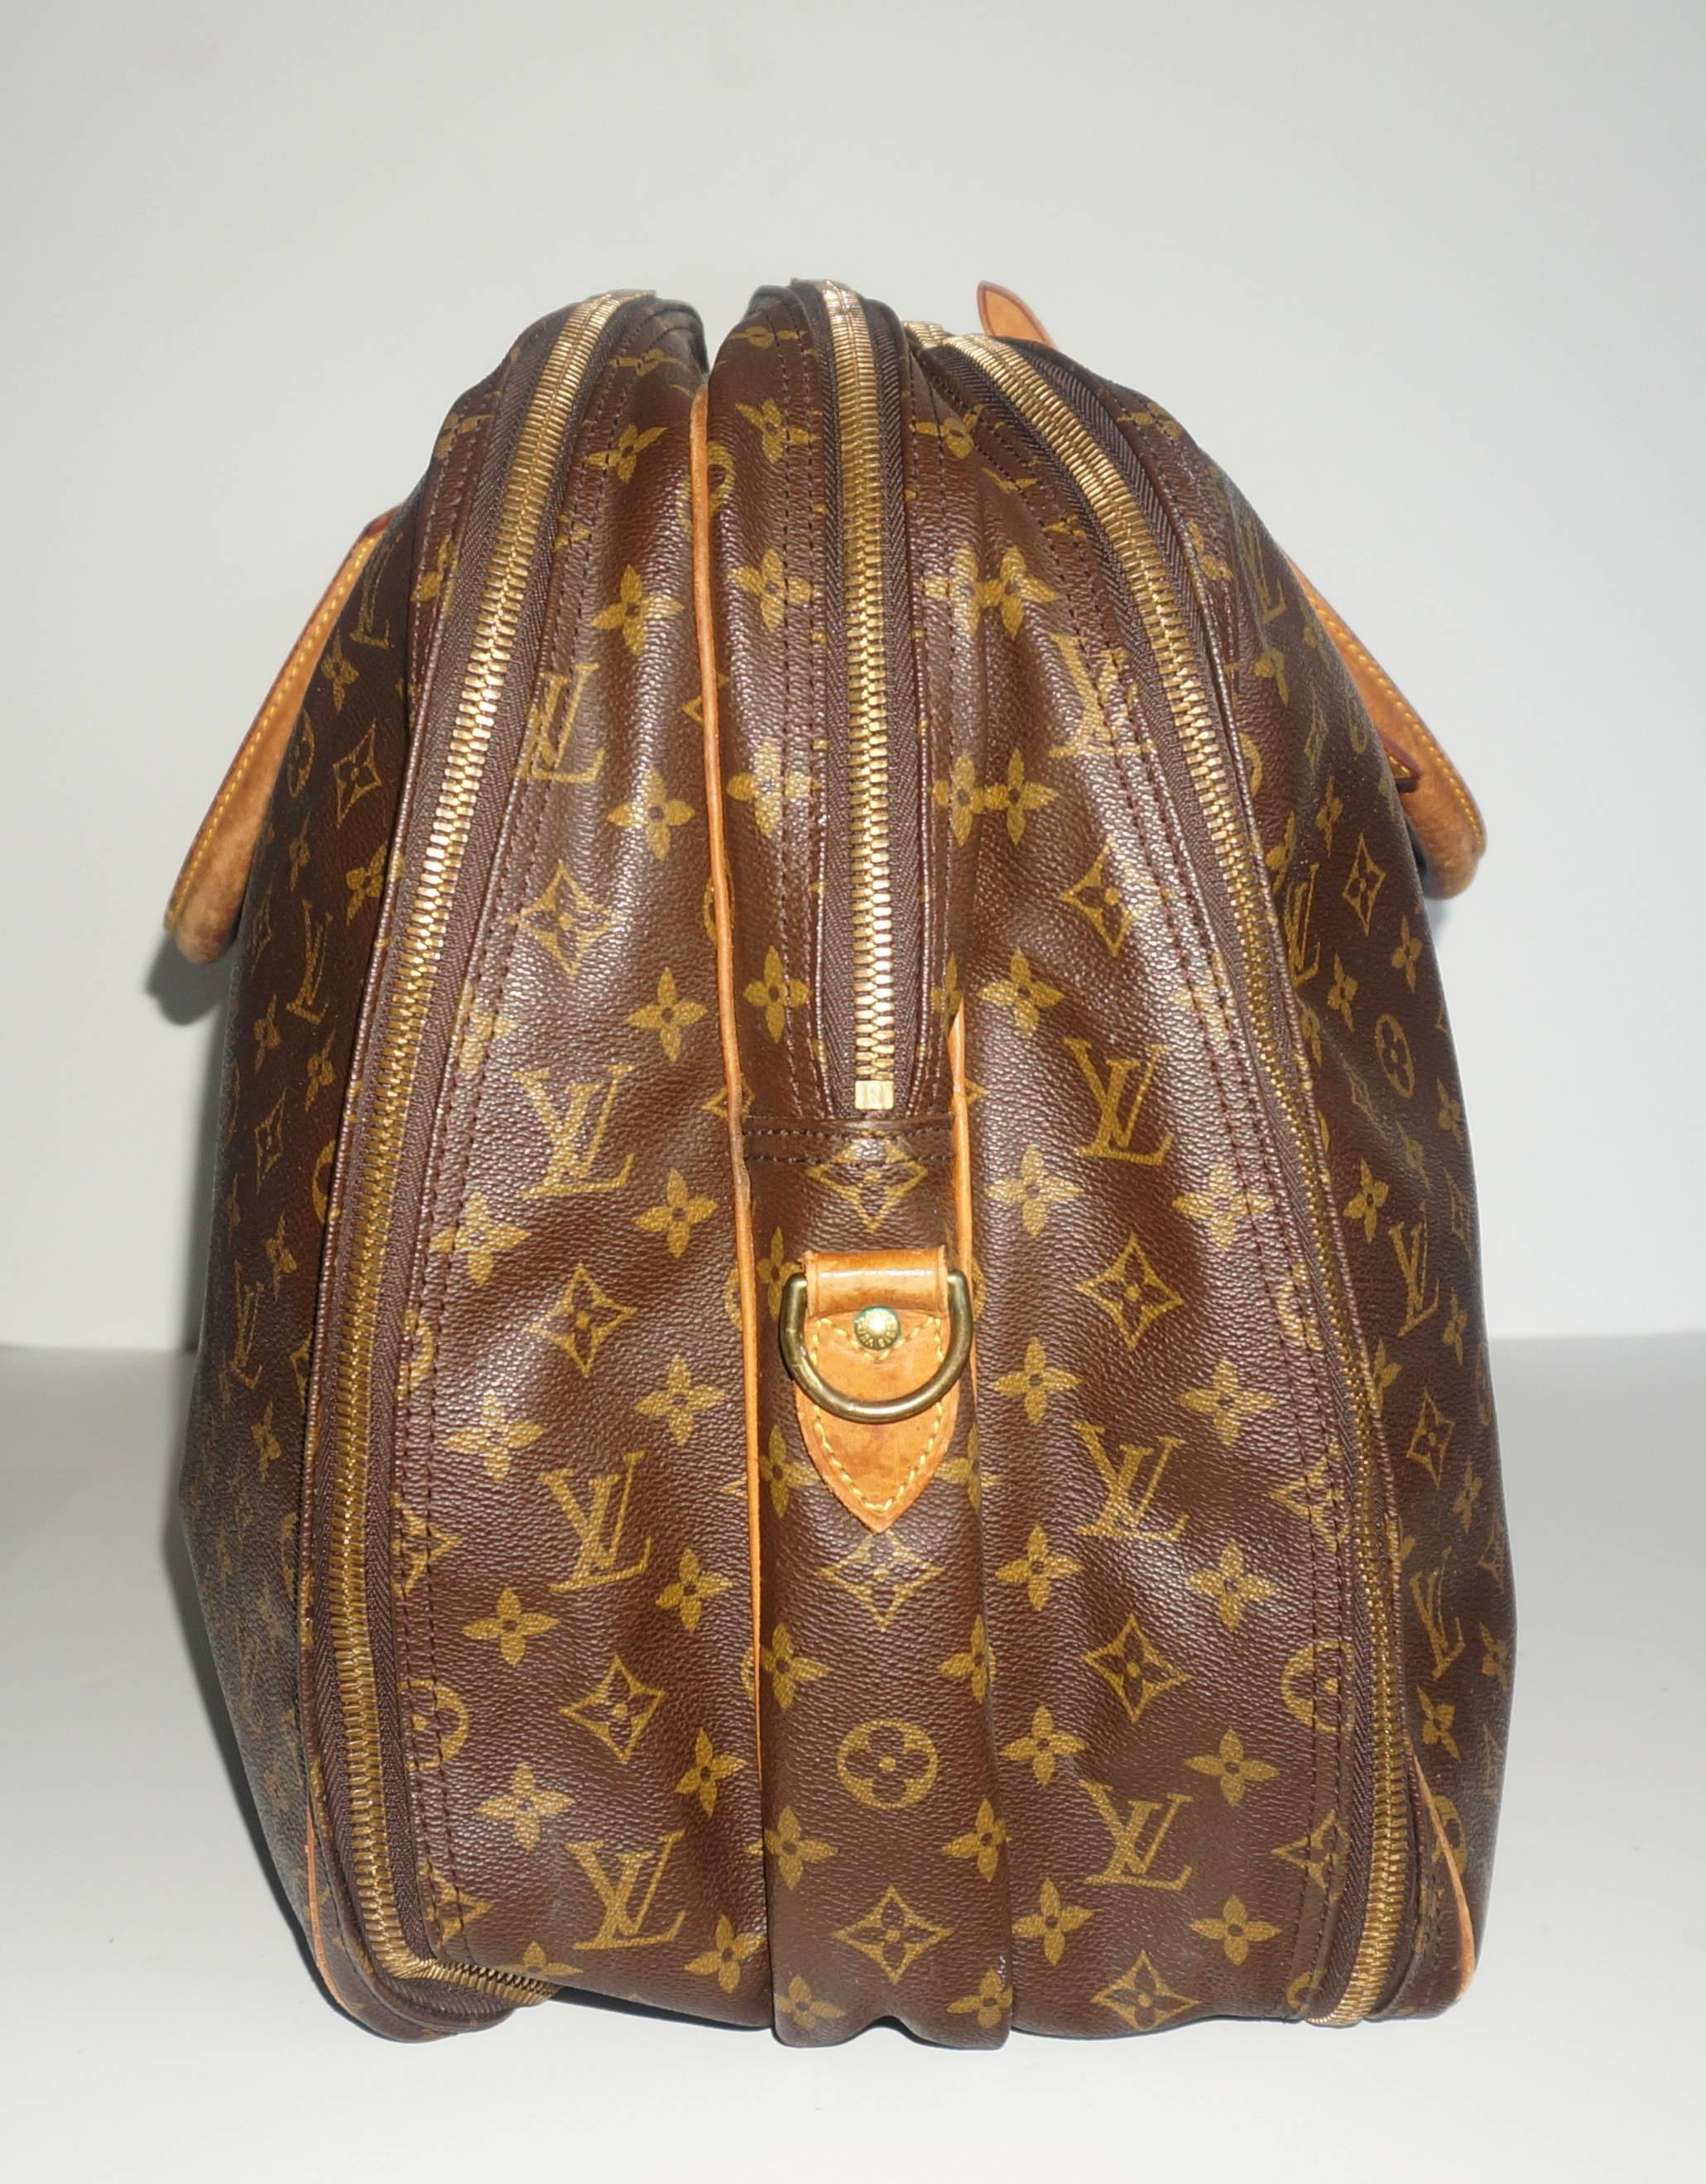 French  Louis Vuitton Weekender Bag with Iconic LV Monogram and Leather Trim